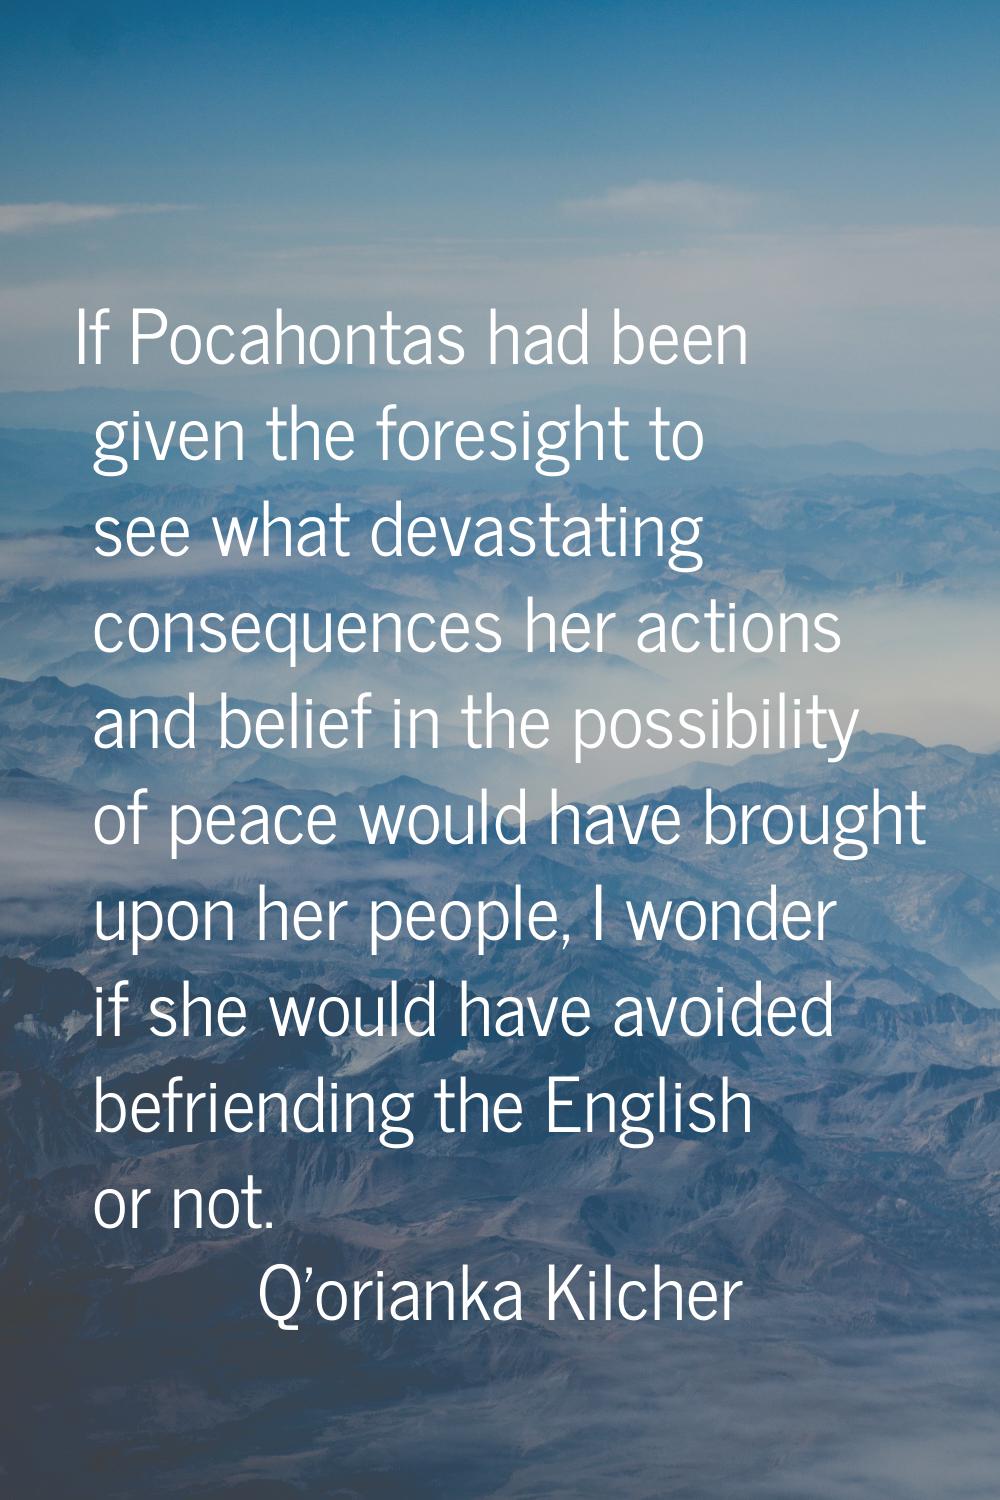 If Pocahontas had been given the foresight to see what devastating consequences her actions and bel